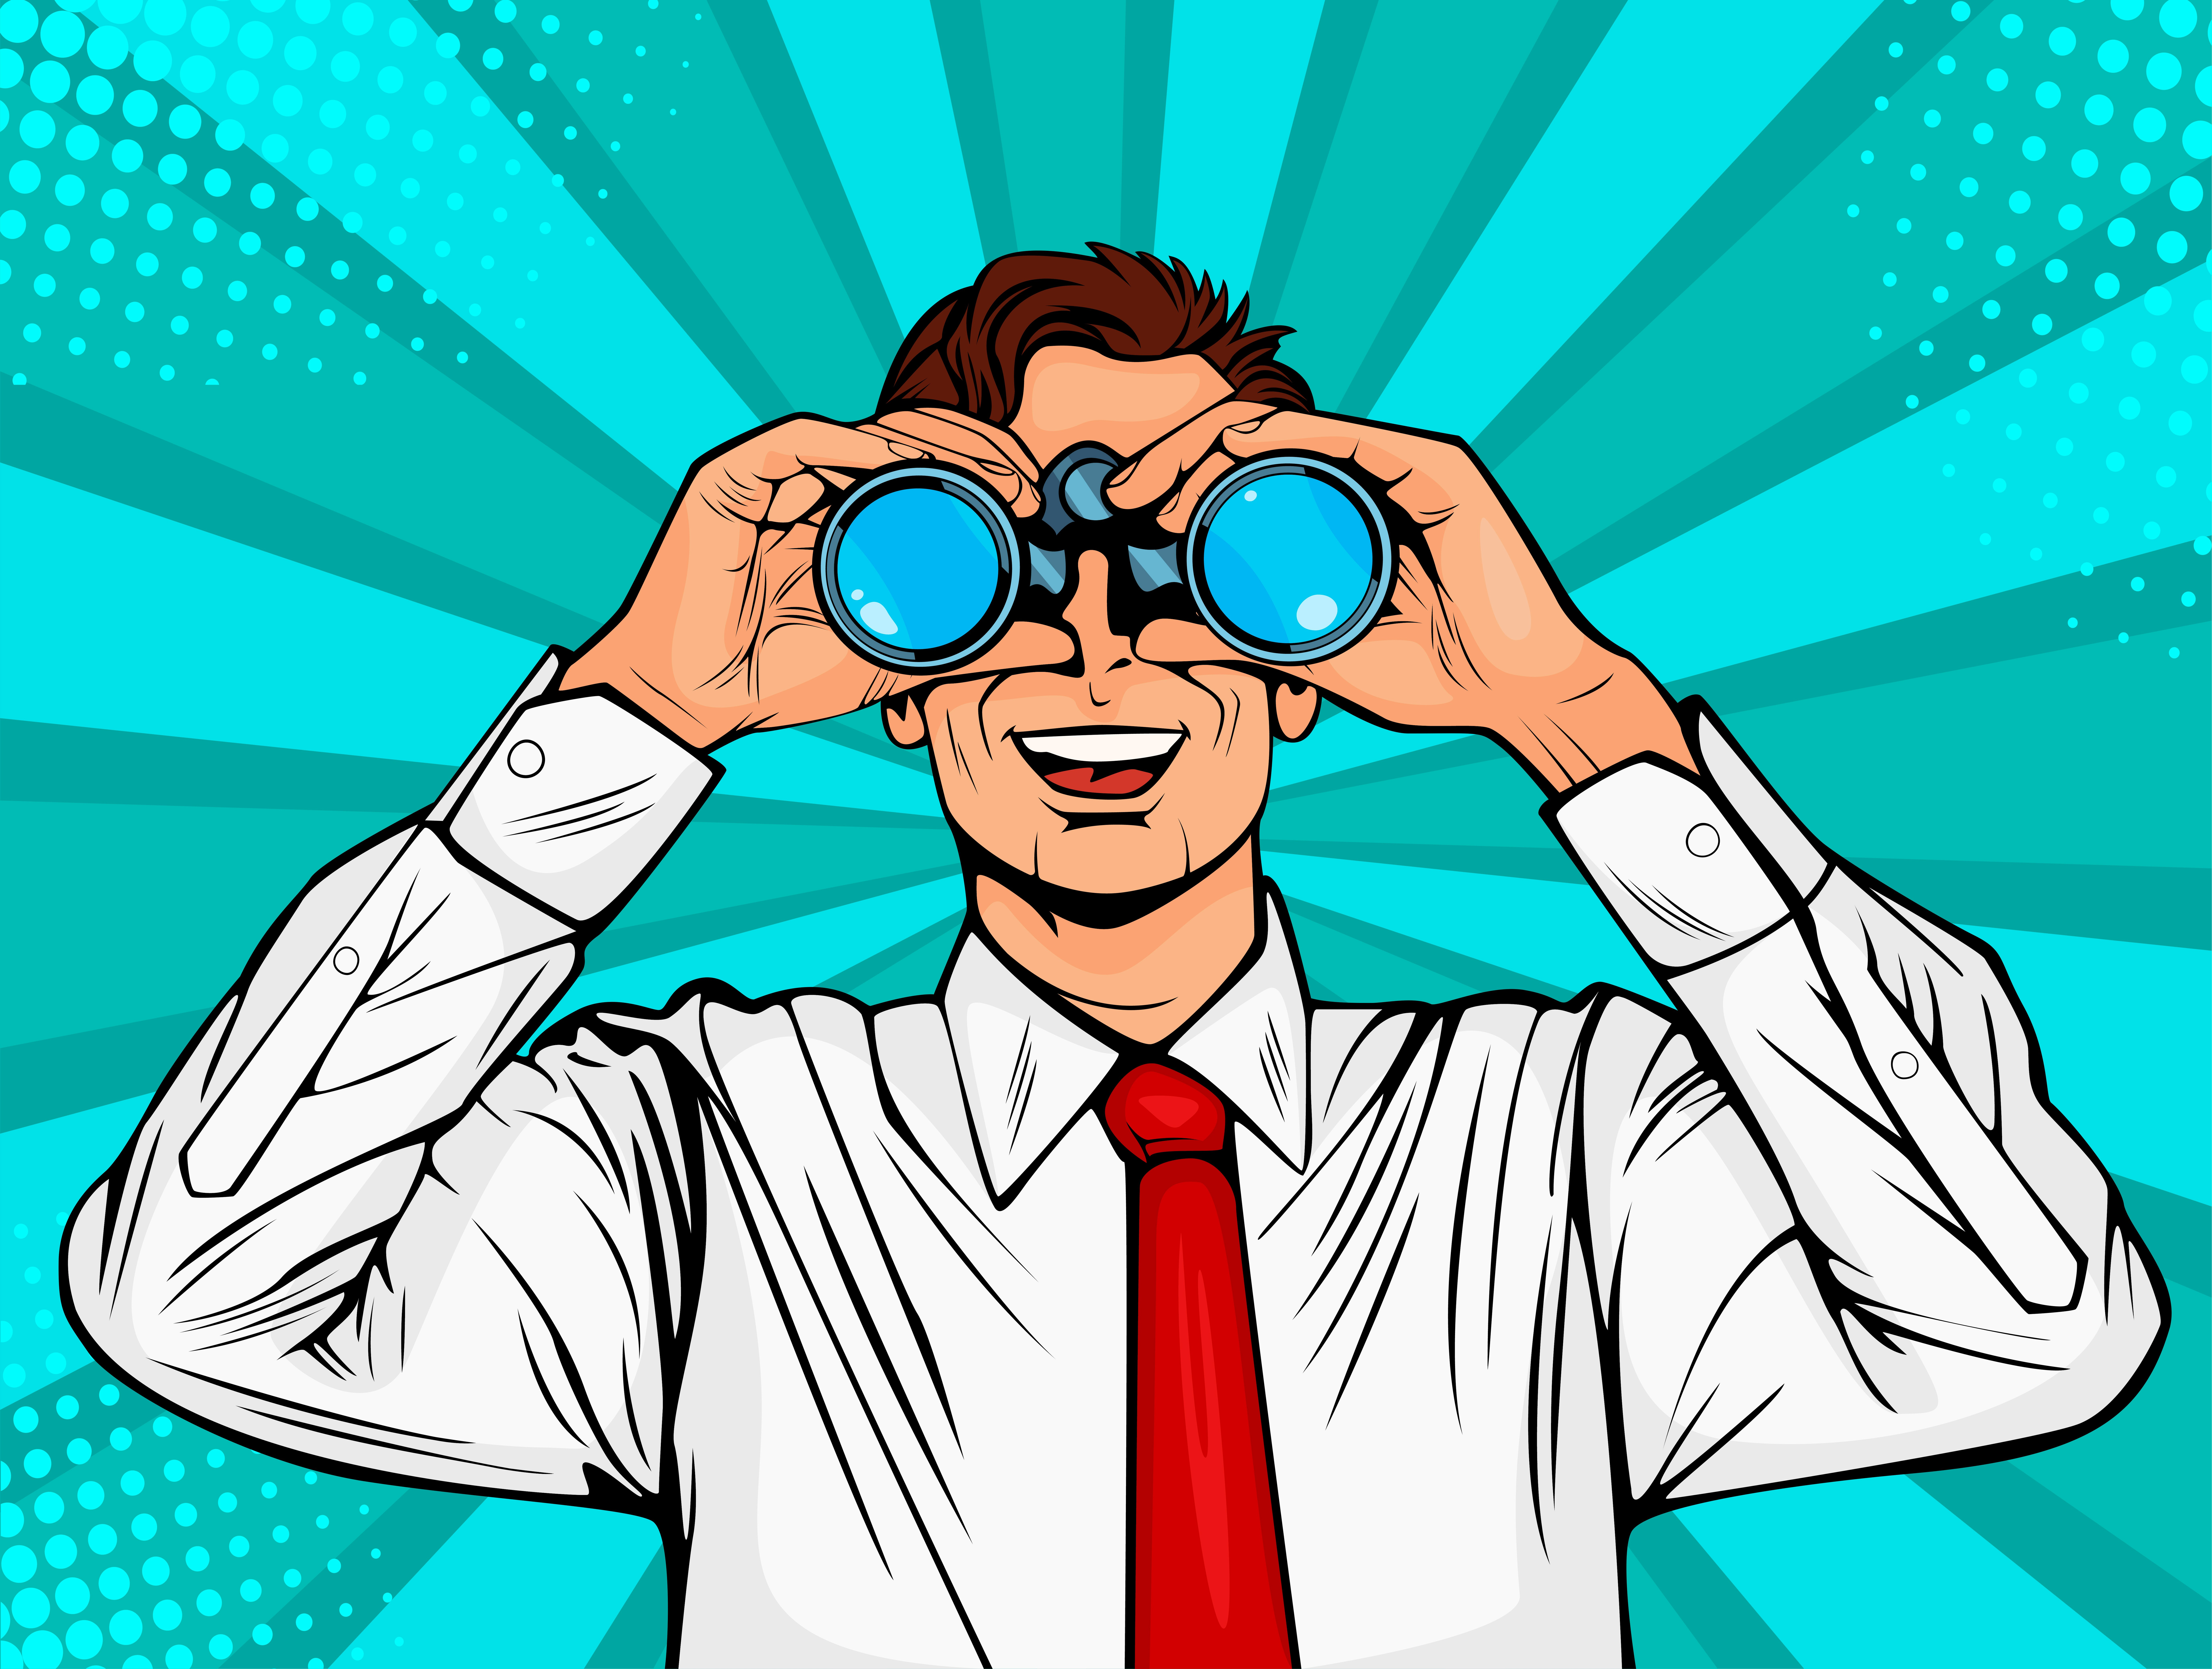 Pop art style HD desktop wallpaper featuring a smiling man in a white shirt and red tie looking through binoculars against a blue halftone background.